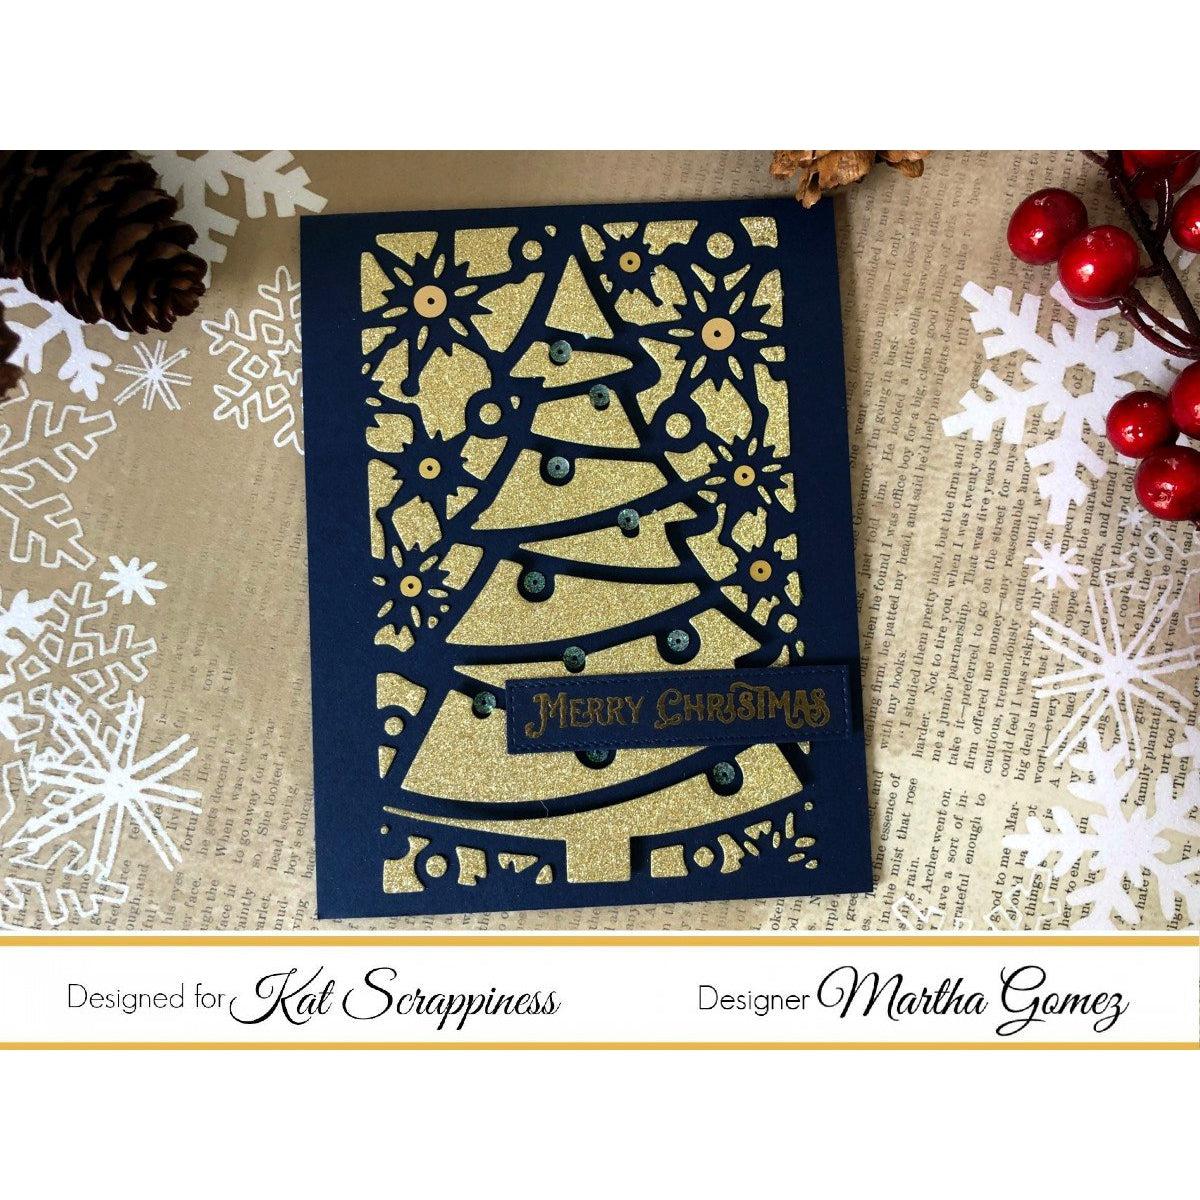 Christmas Tree Coverplate Die by Kat Scrappiness - Kat Scrappiness